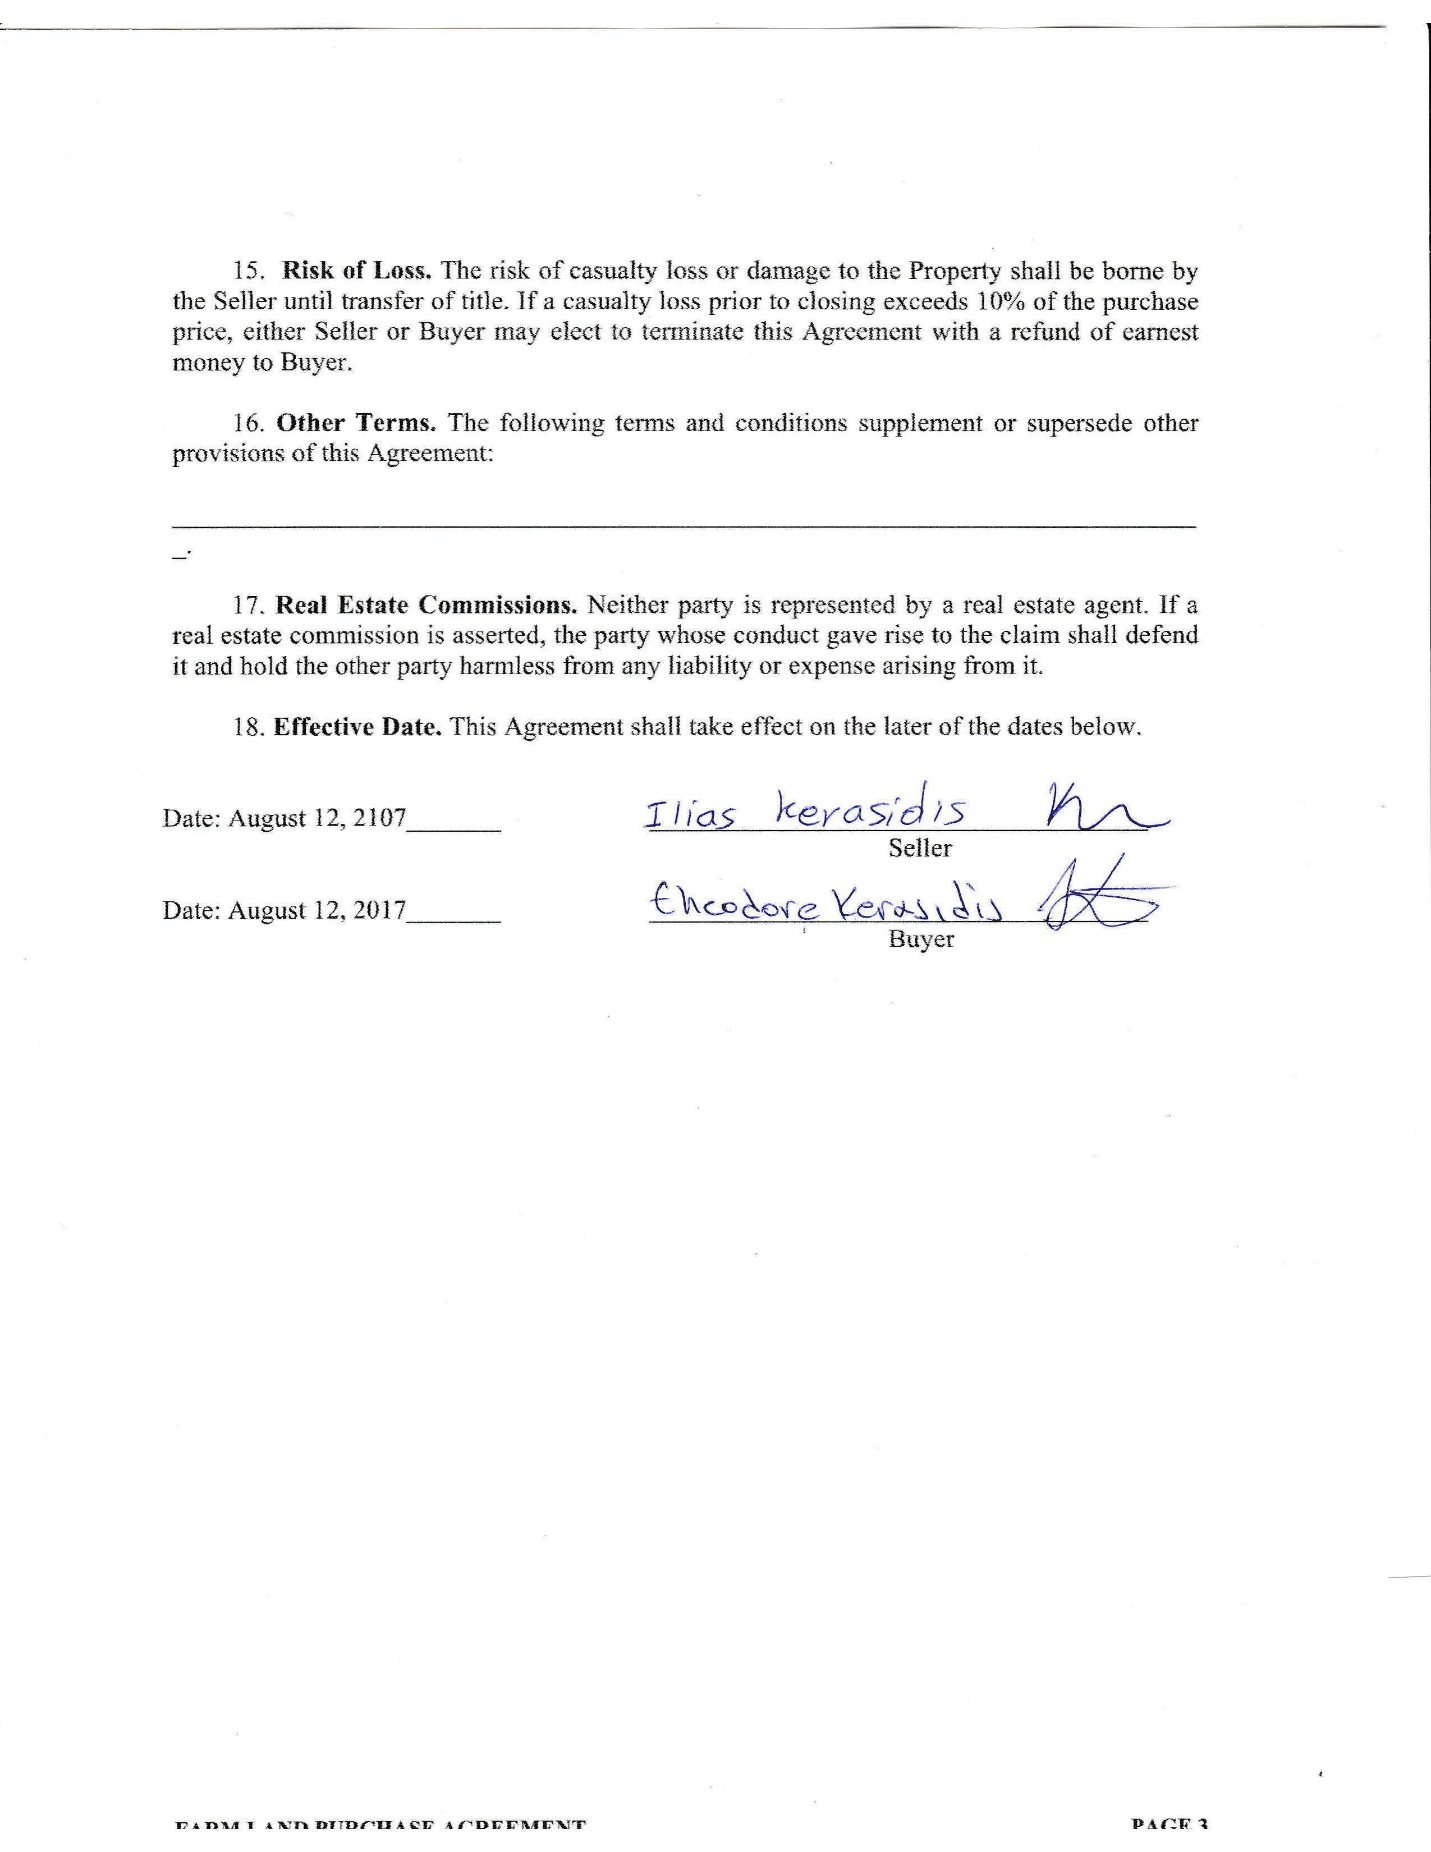 Ex 10.02 Farm Land Purchase Agreement_Page_3.jpg